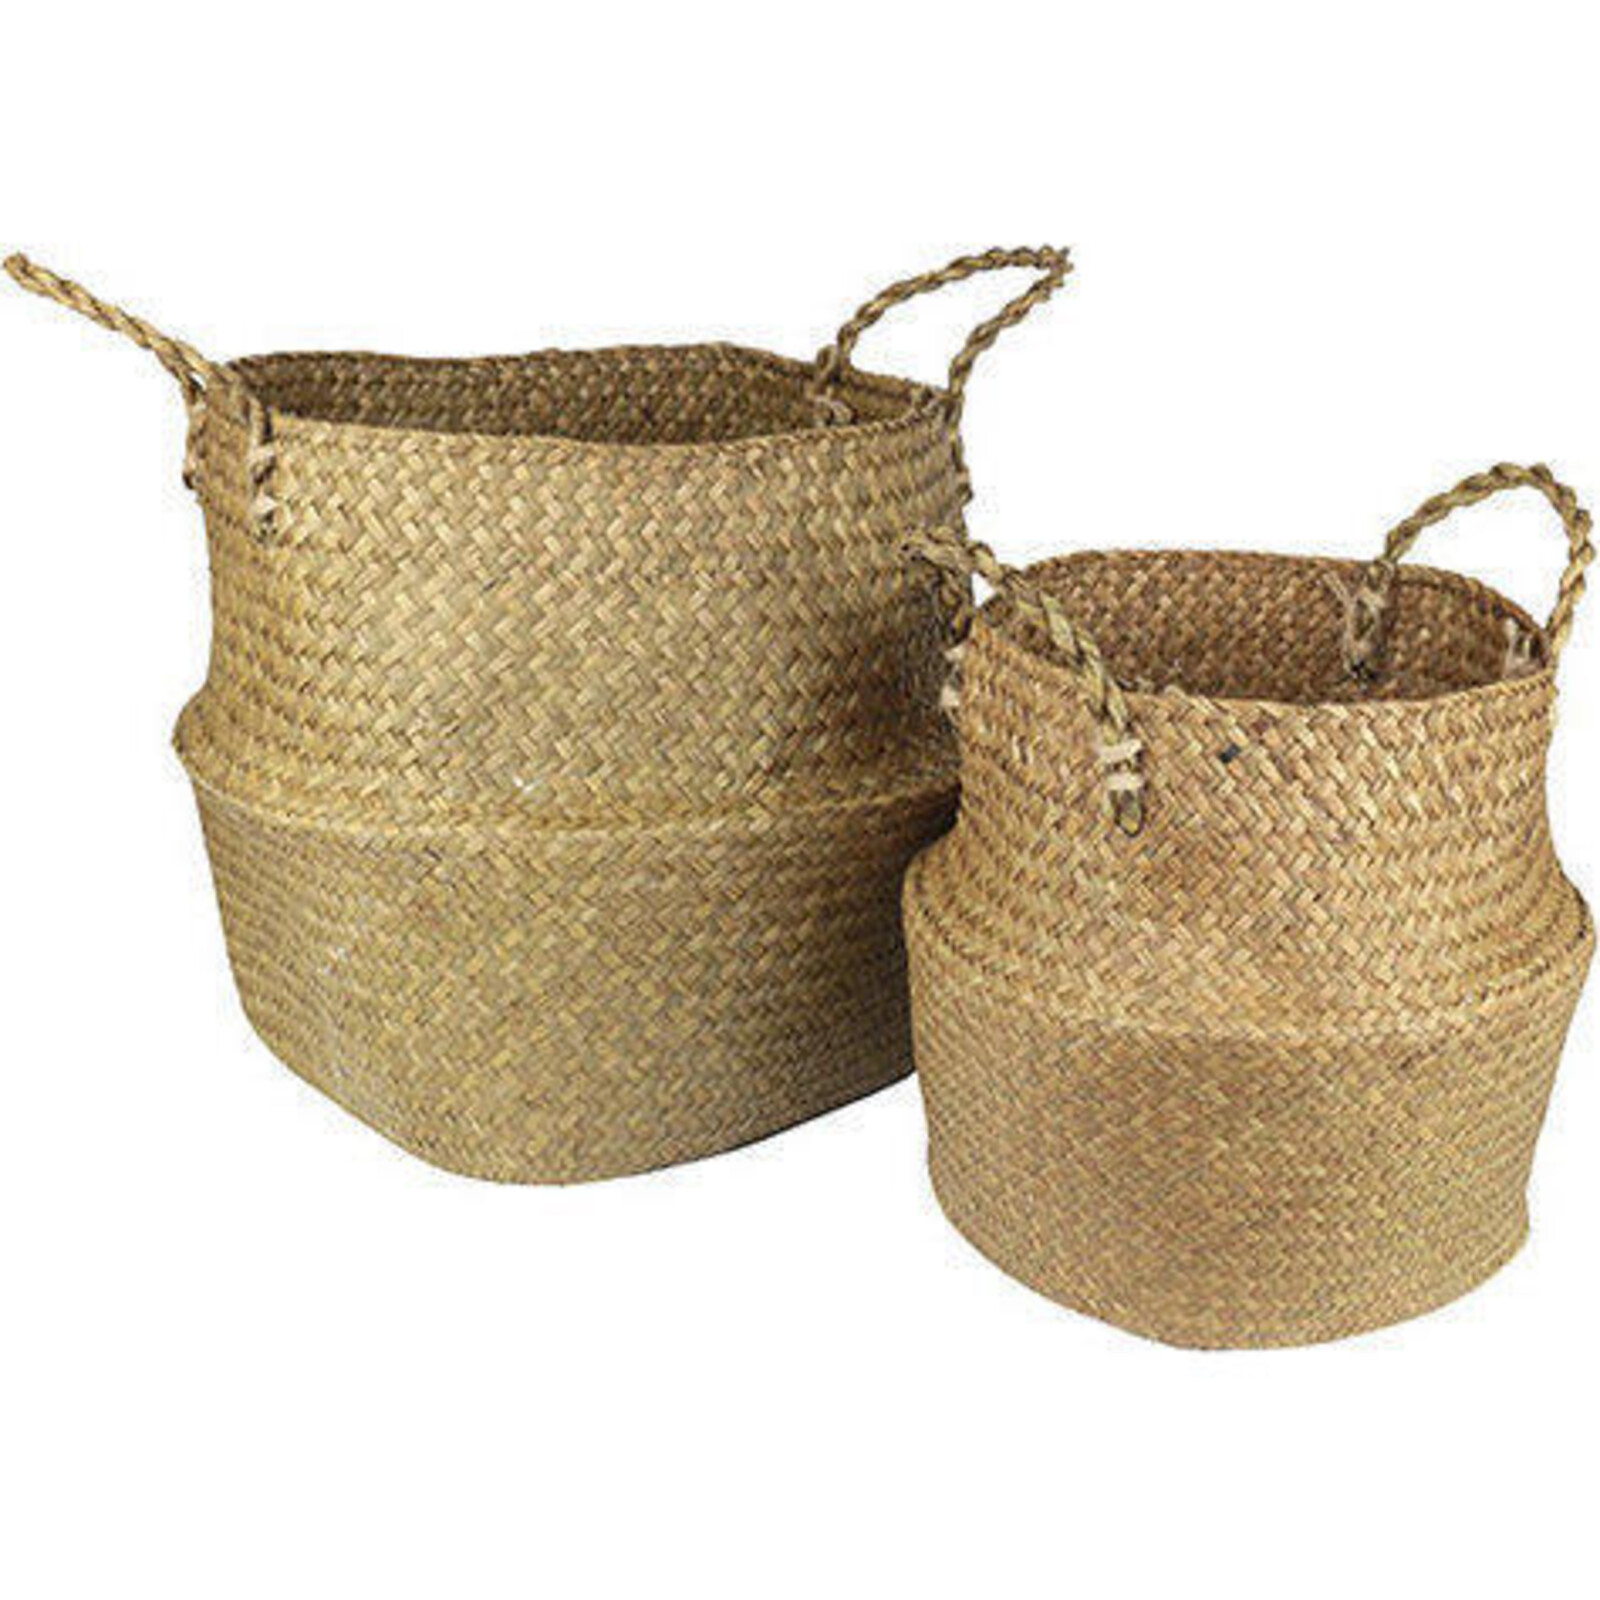 Woven Belly Basket Nat S/2